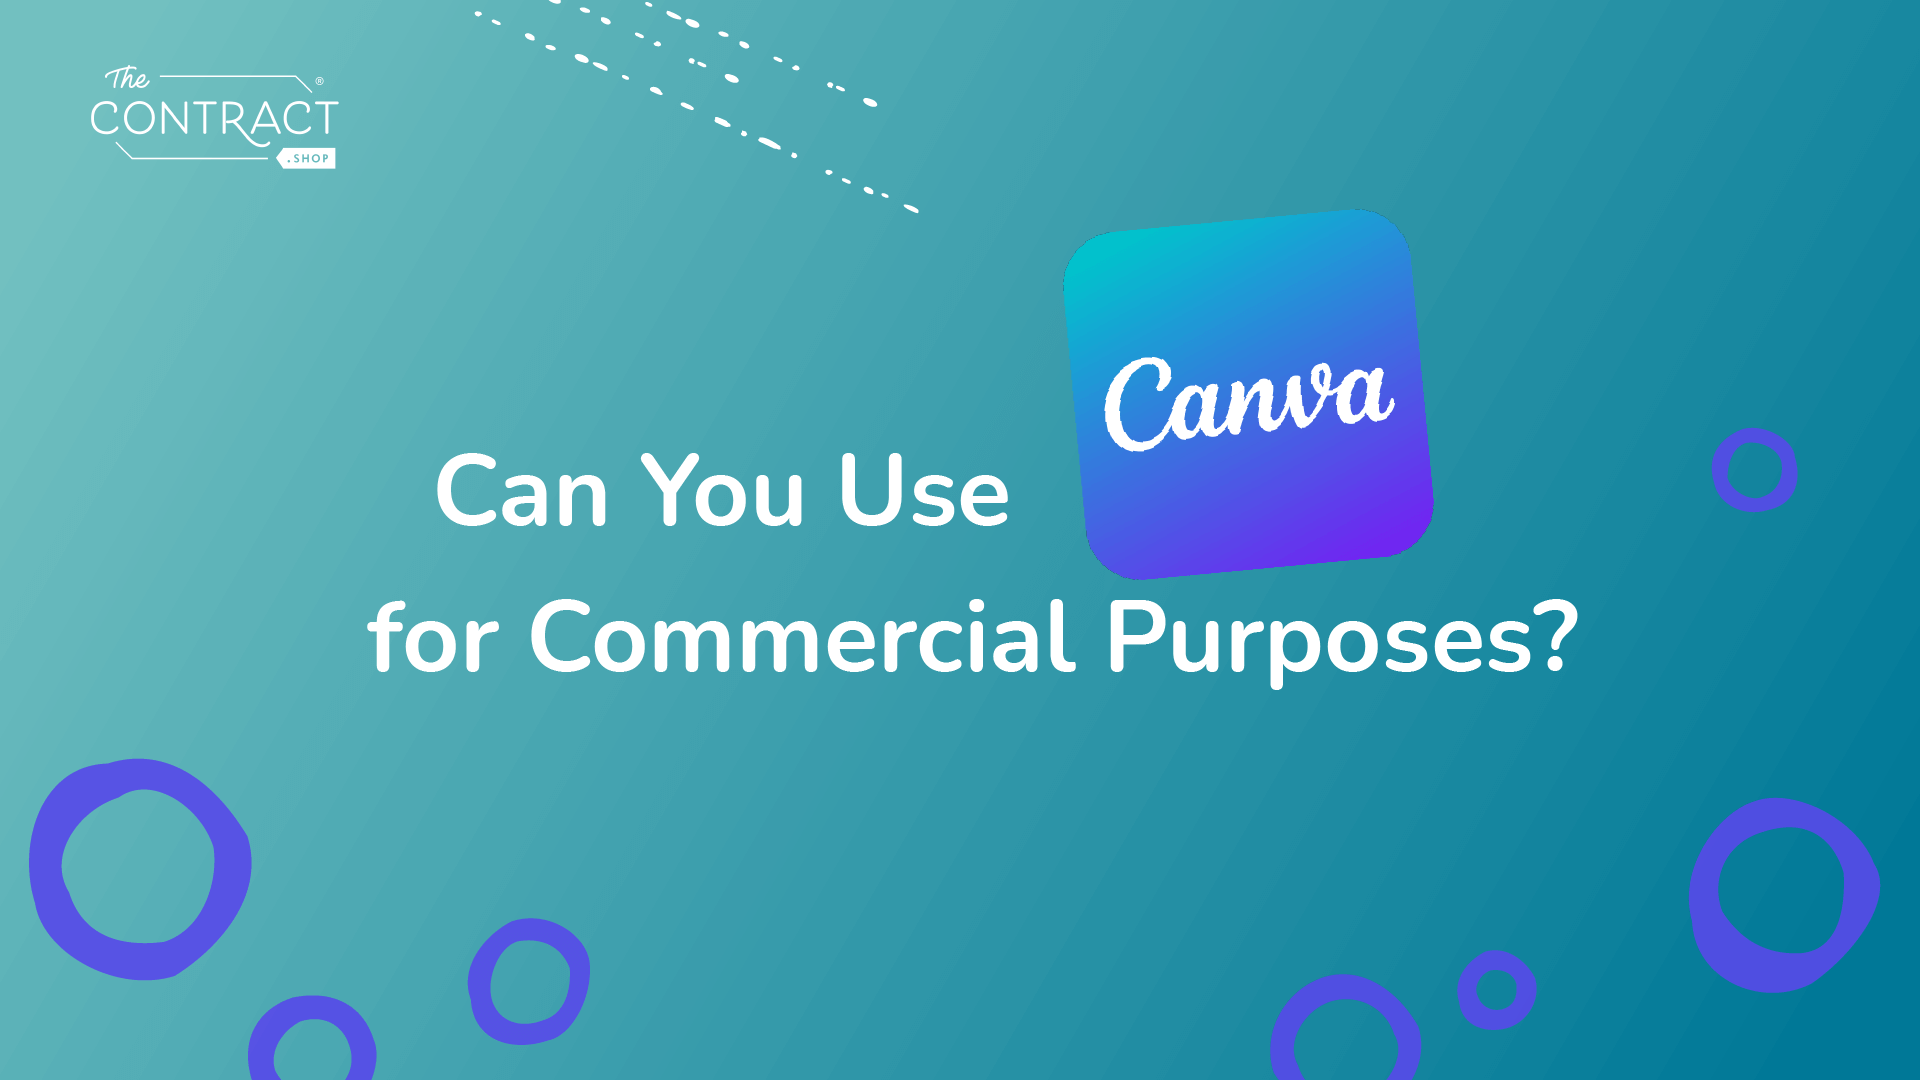 Can You Use Canva for Commercial Purposes?